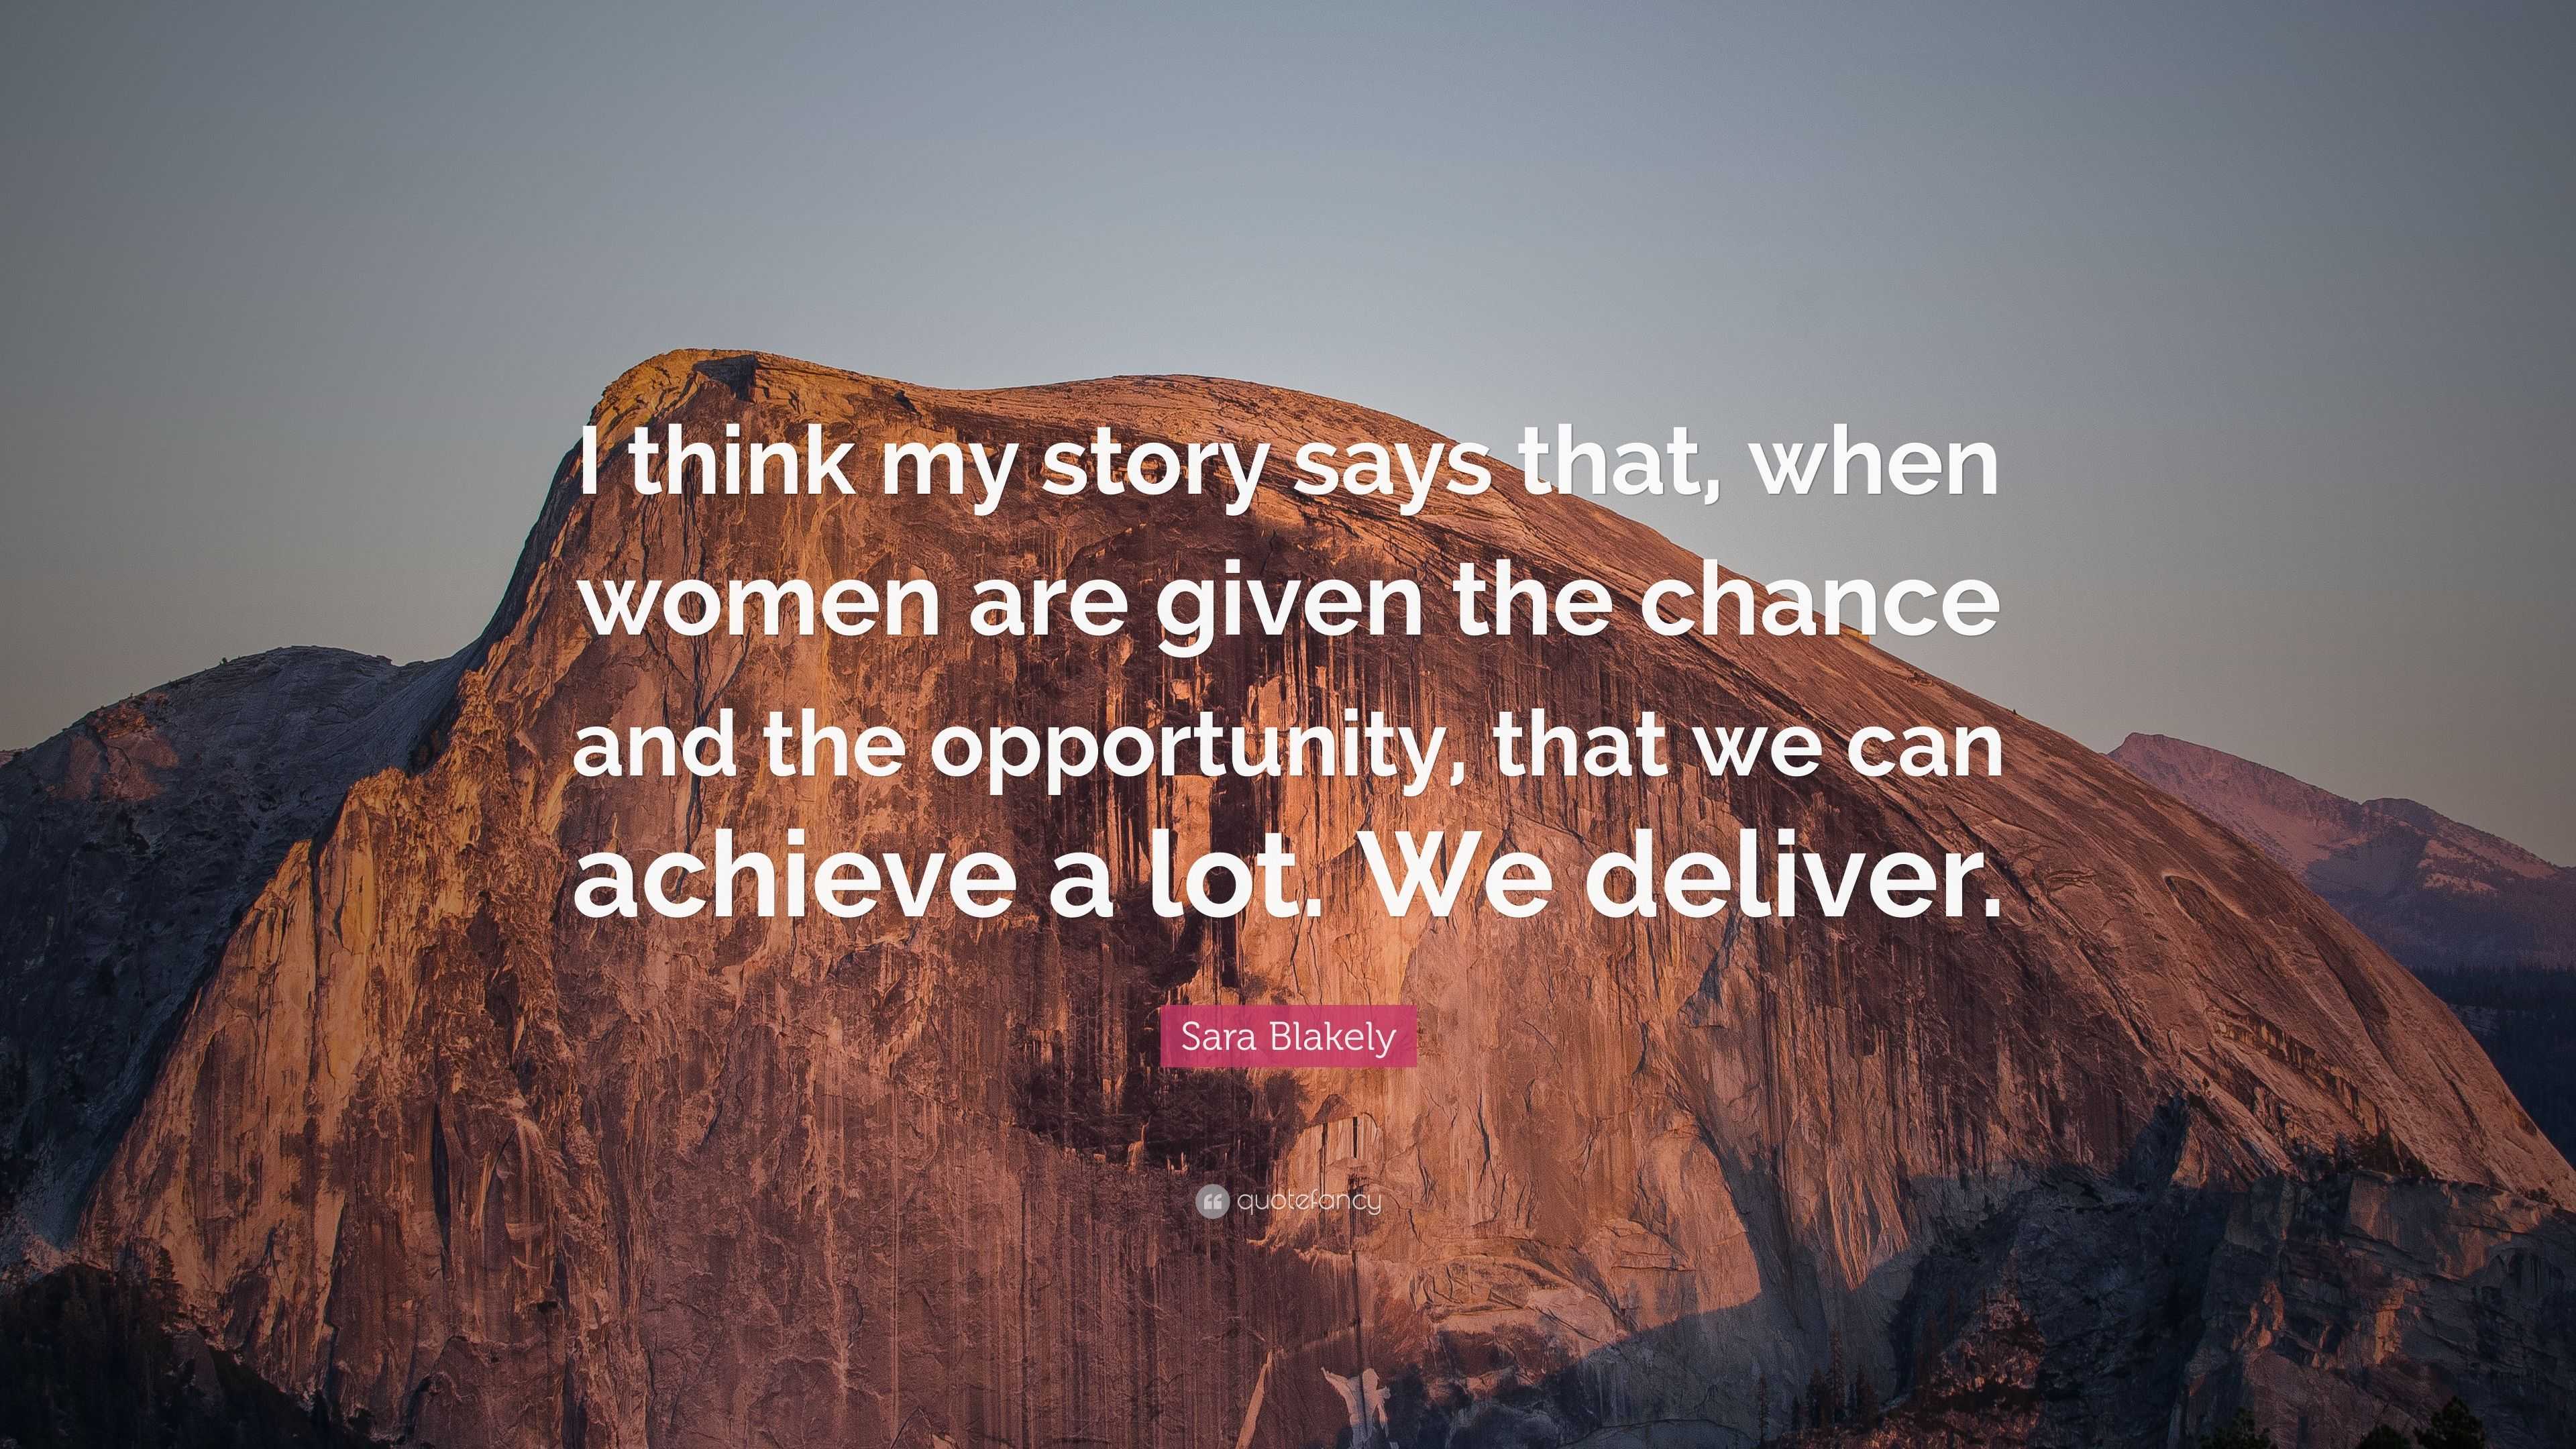 Sara Blakely Quote: “I think my story says that, when women are given ...